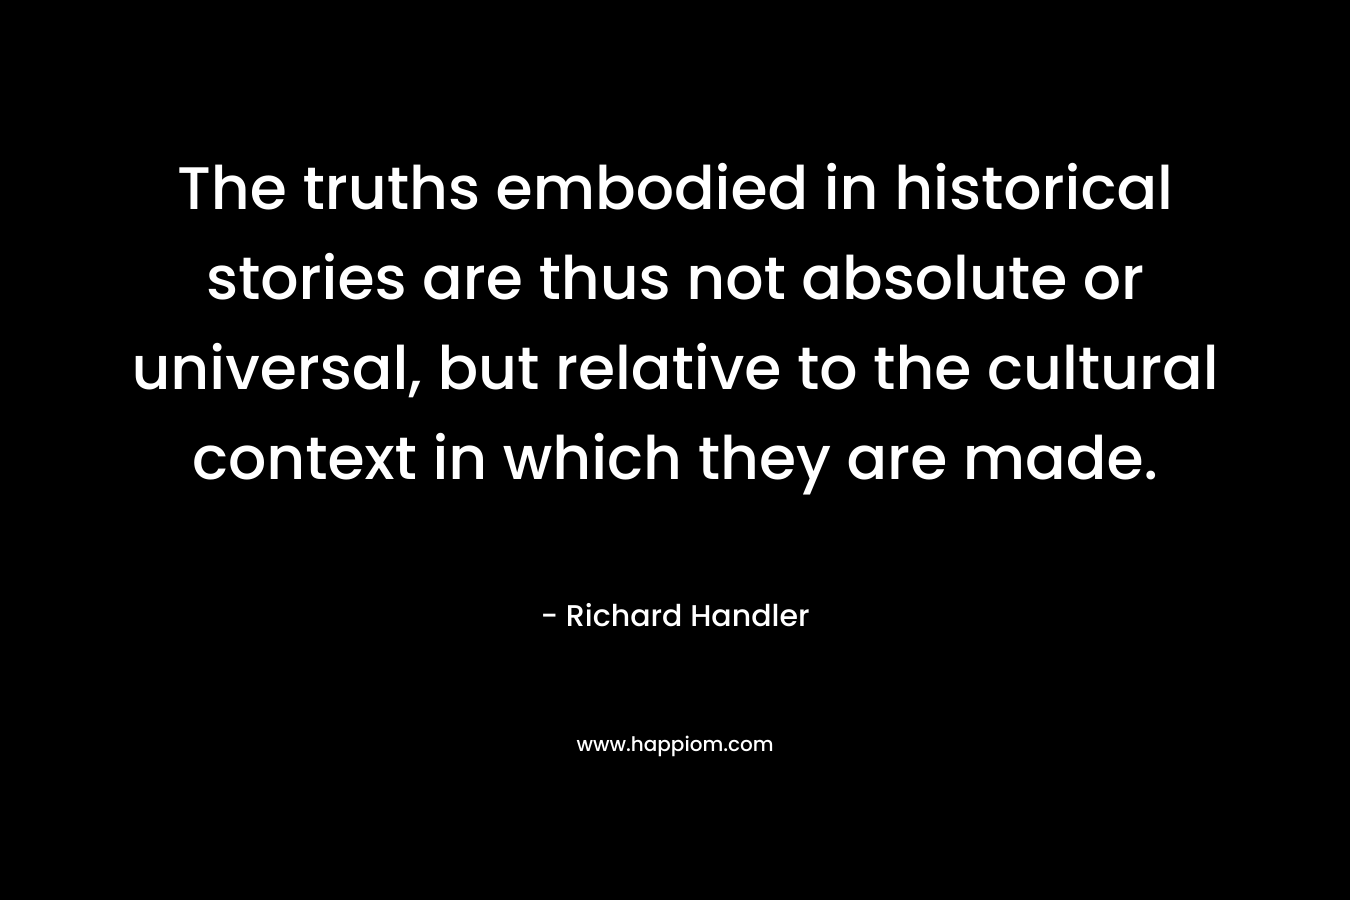 The truths embodied in historical stories are thus not absolute or universal, but relative to the cultural context in which they are made. – Richard Handler